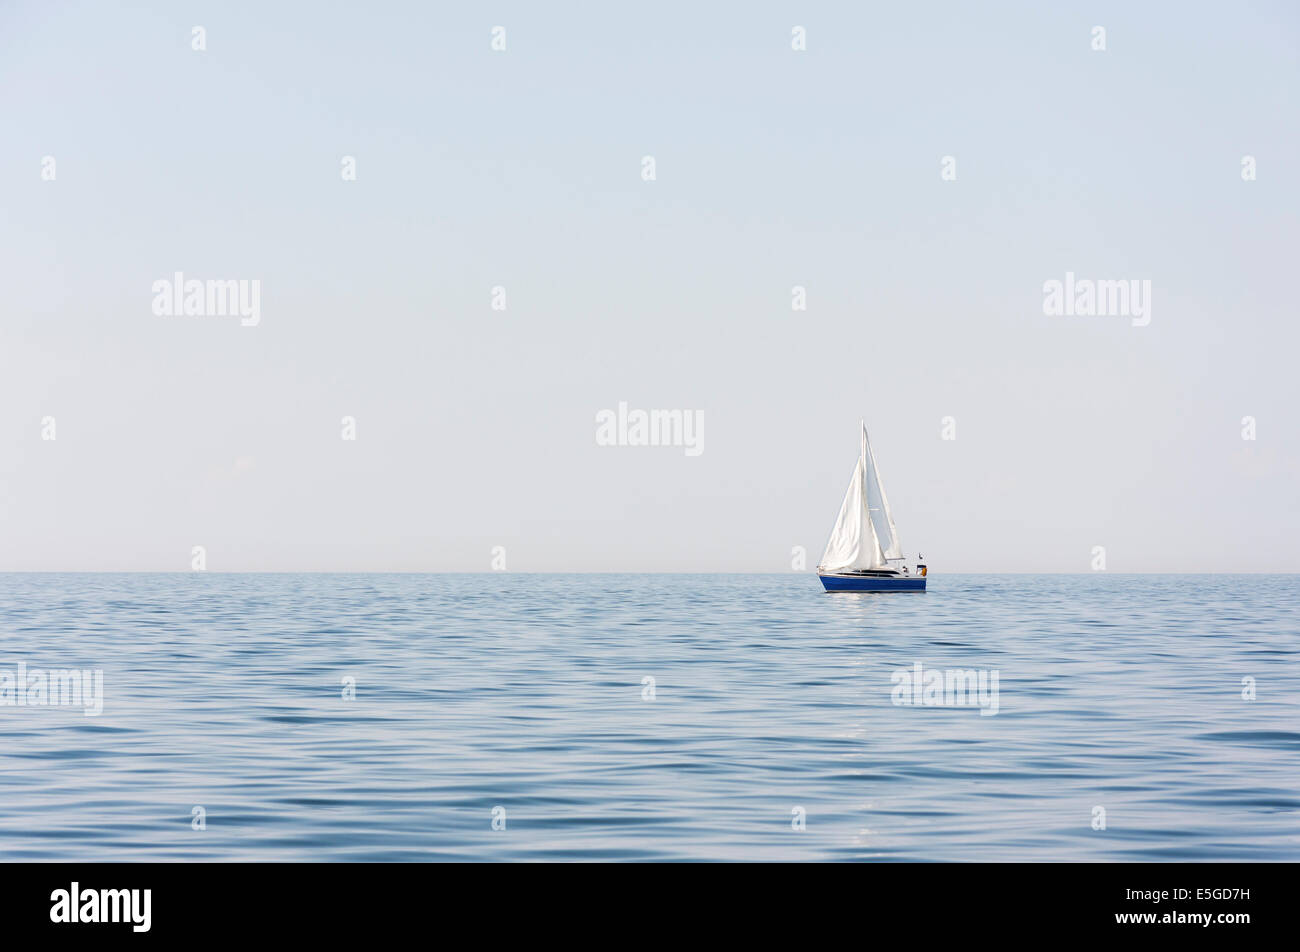 Blue sail ship with white sails at sea or ocean Stock Photo